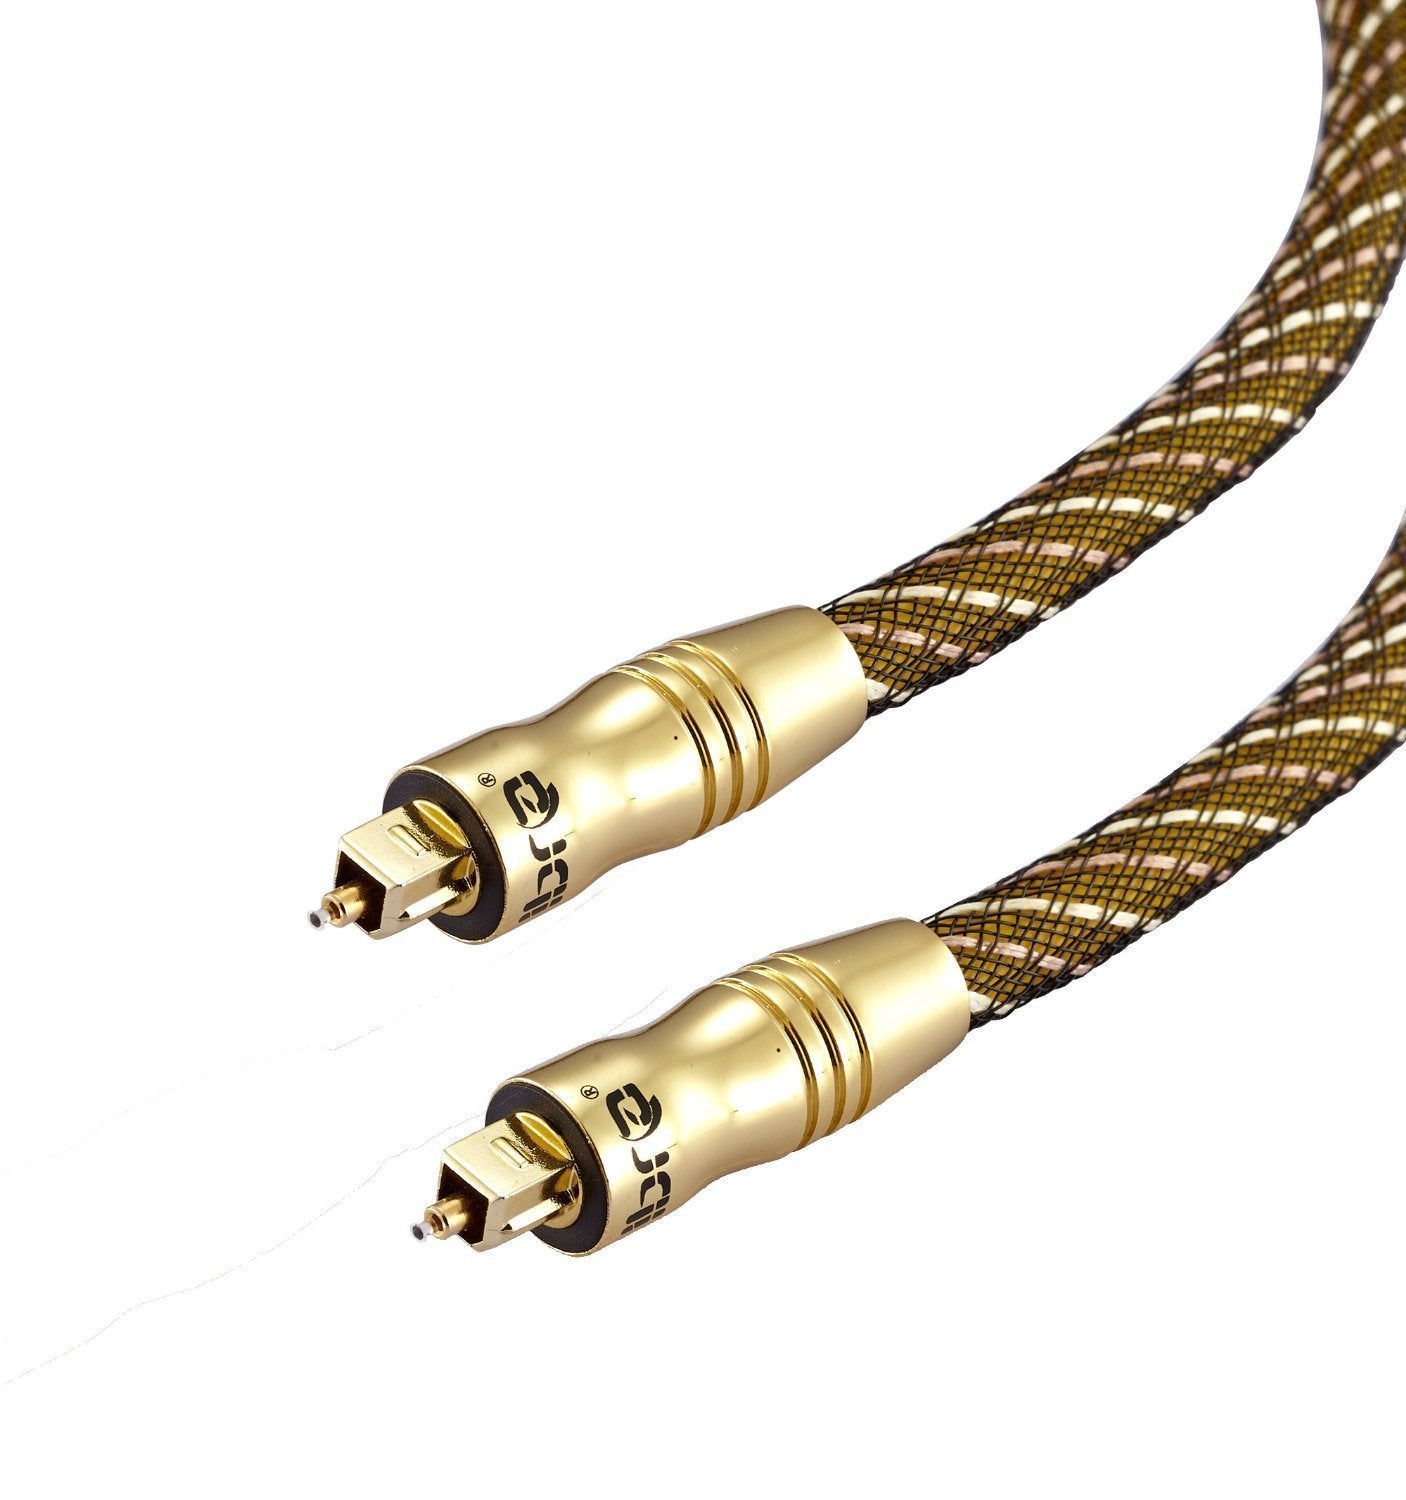 IBRA 20M Master Gold Optical TOSLINK Digital Audio Cable - Suitable for PS3, Sky, Sky HD, LCD, LED, Plasma, Blu-ray, Home Cinema Systems, AV Amps